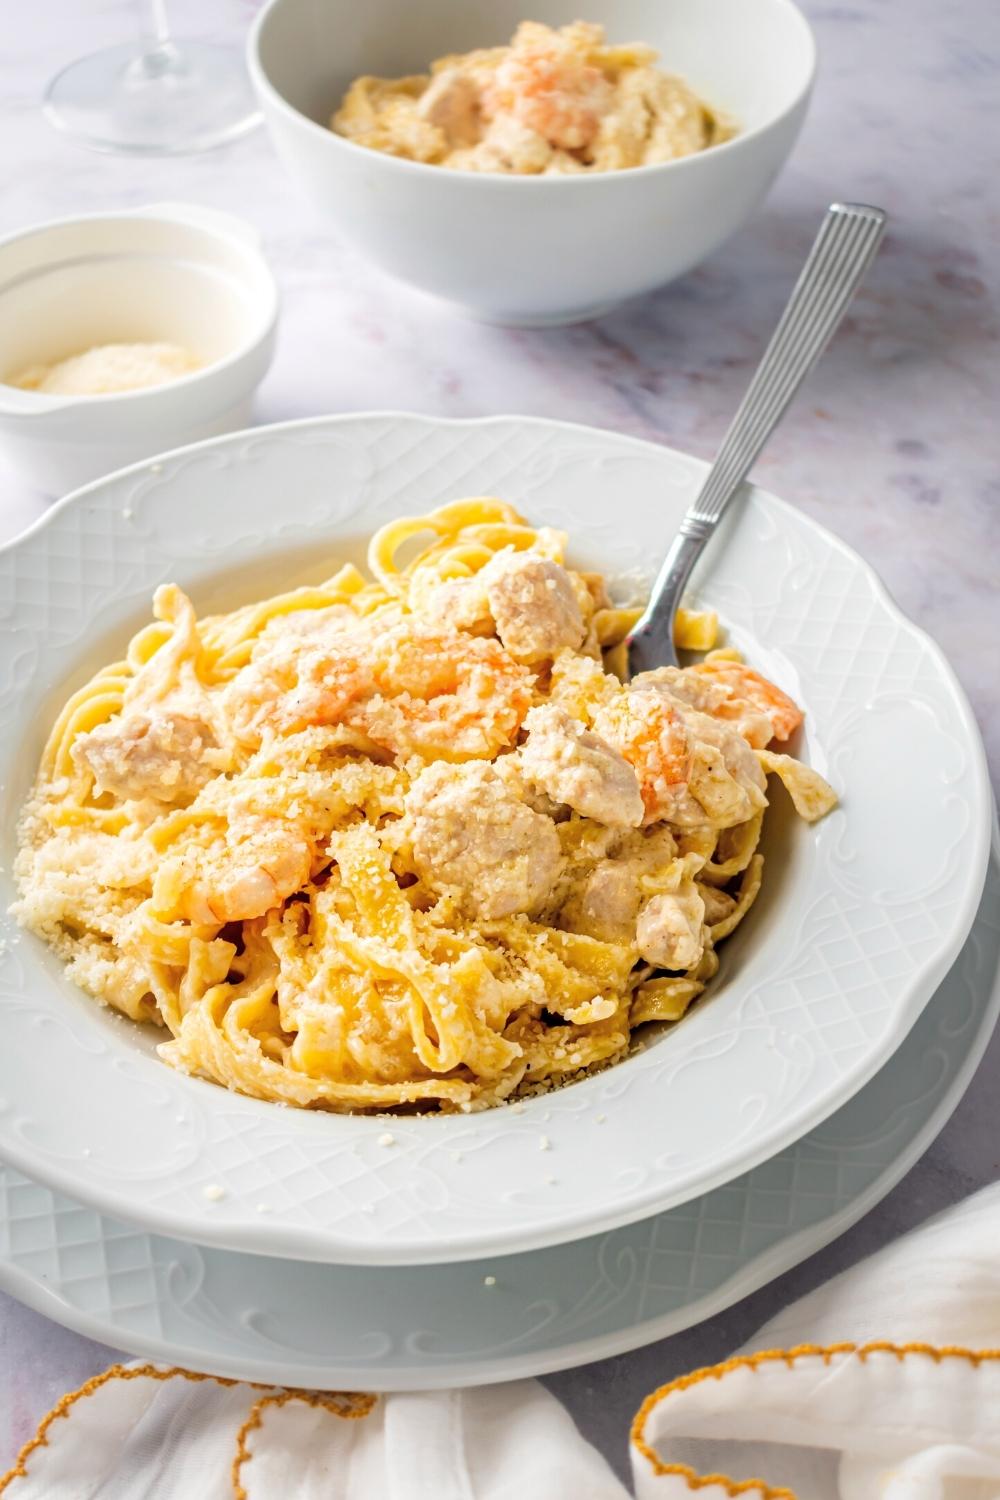 Chicken and shrimp fettuccine Alfredo in a white bowl with a spoon submerged in it. Behind it is a cup of Parmesan cheese and part of a bowl with the chicken and shrimp Alfredo in it.